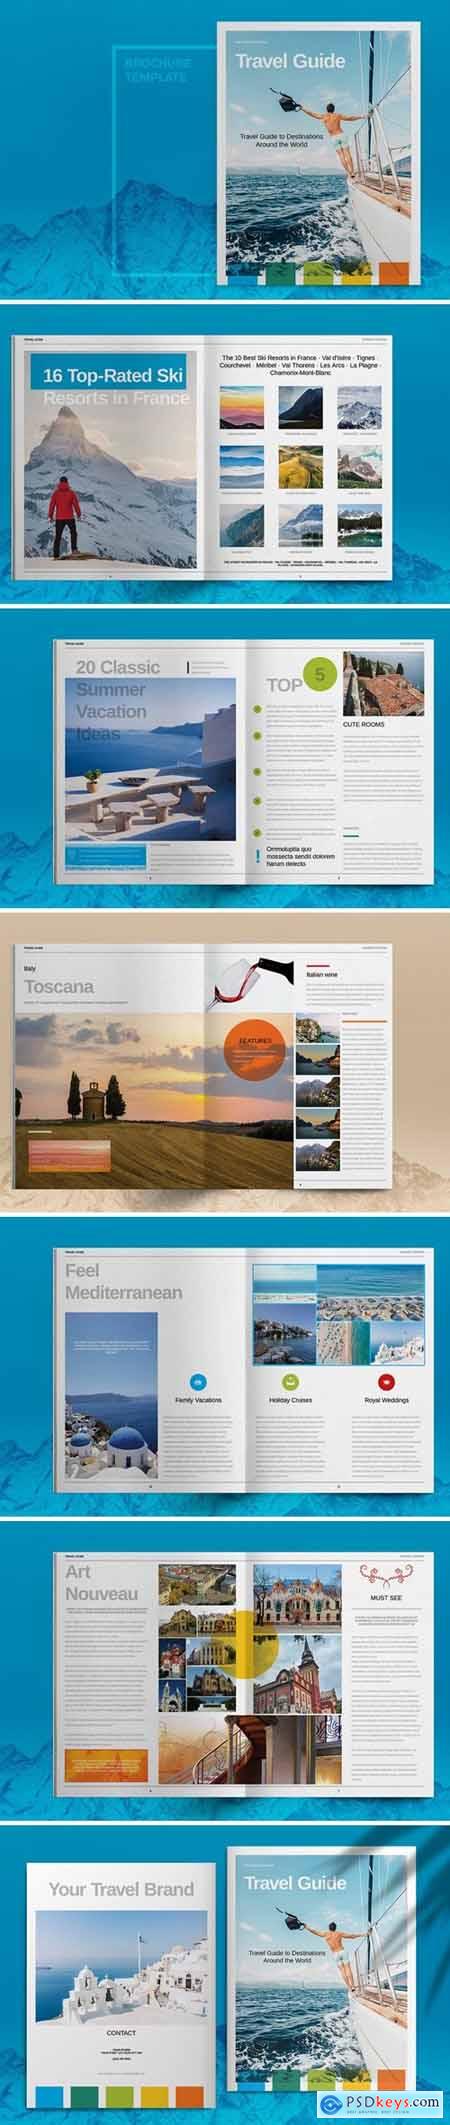 Blue Travel Guide Brochure Template » Free Download Photoshop For Travel Guide Brochure Template